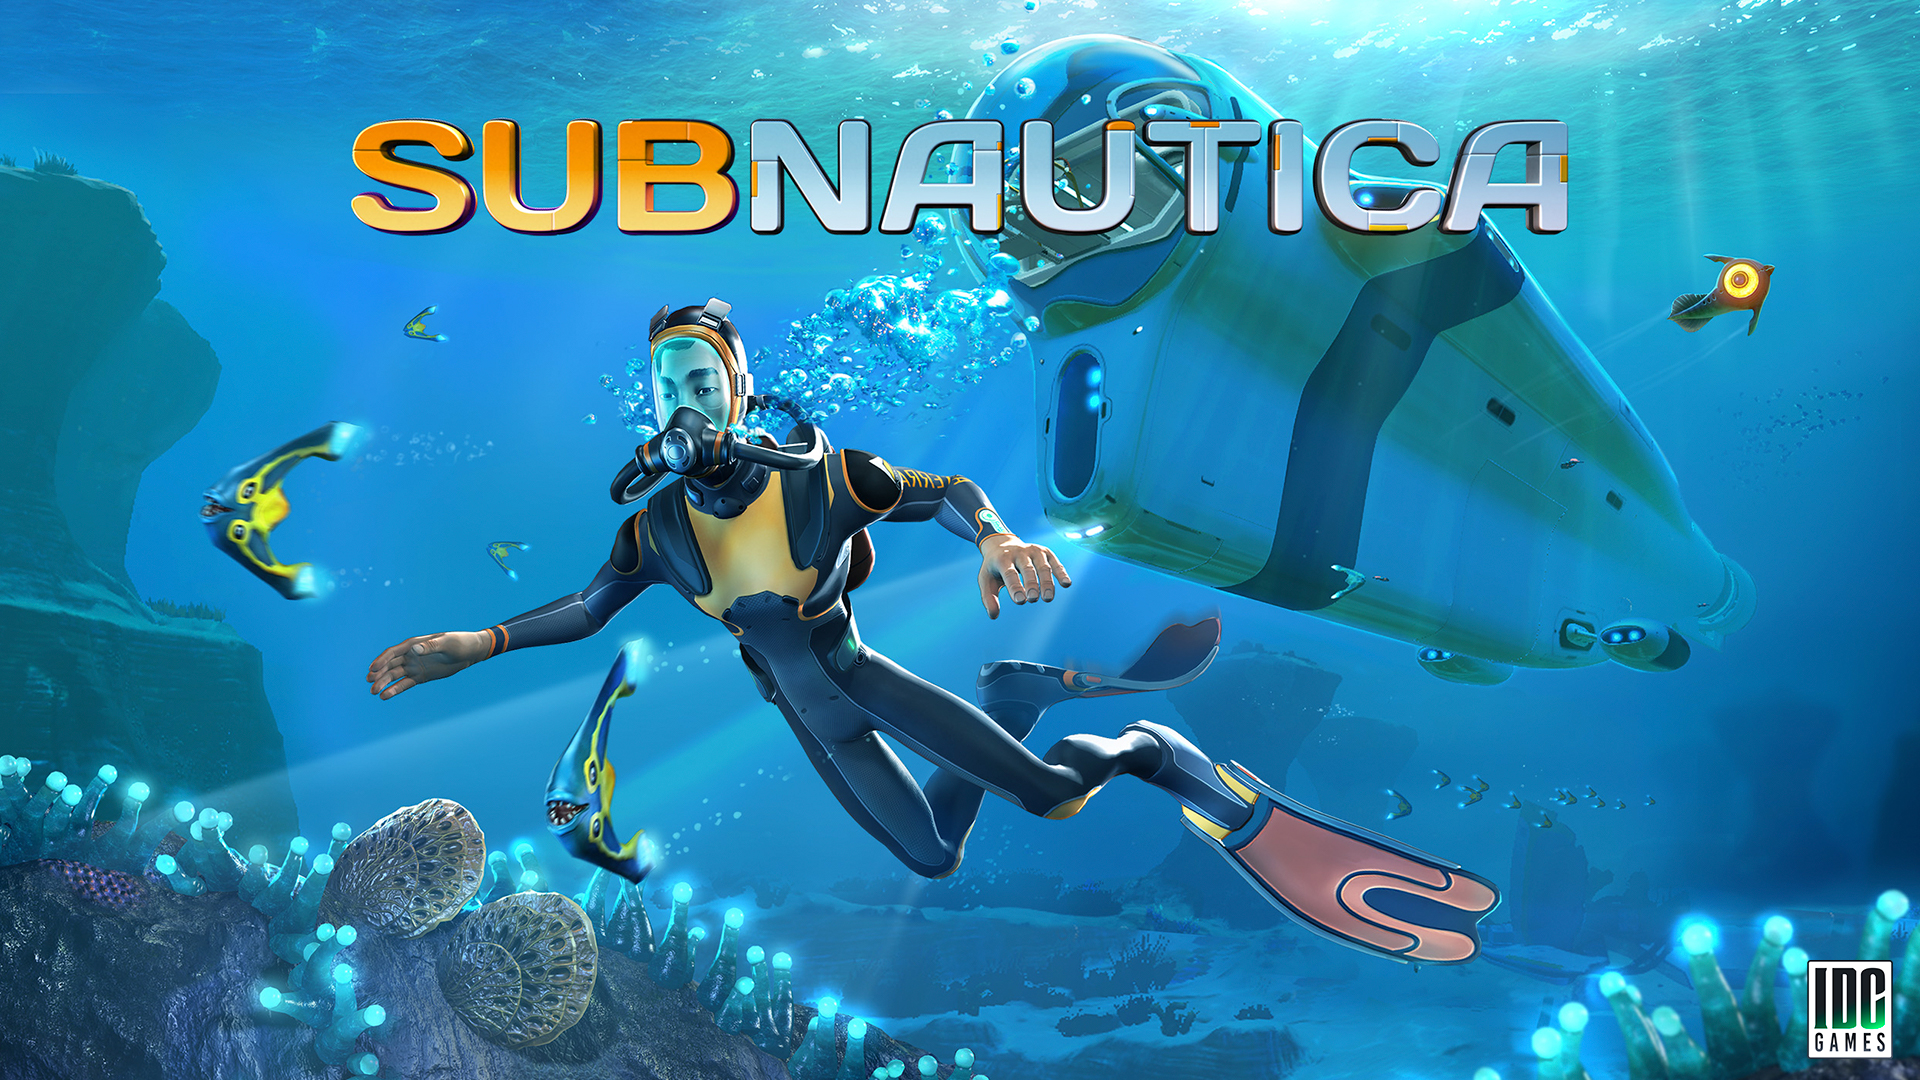 Exploring the Depths: A Technical Analysis of the Subnautica Game